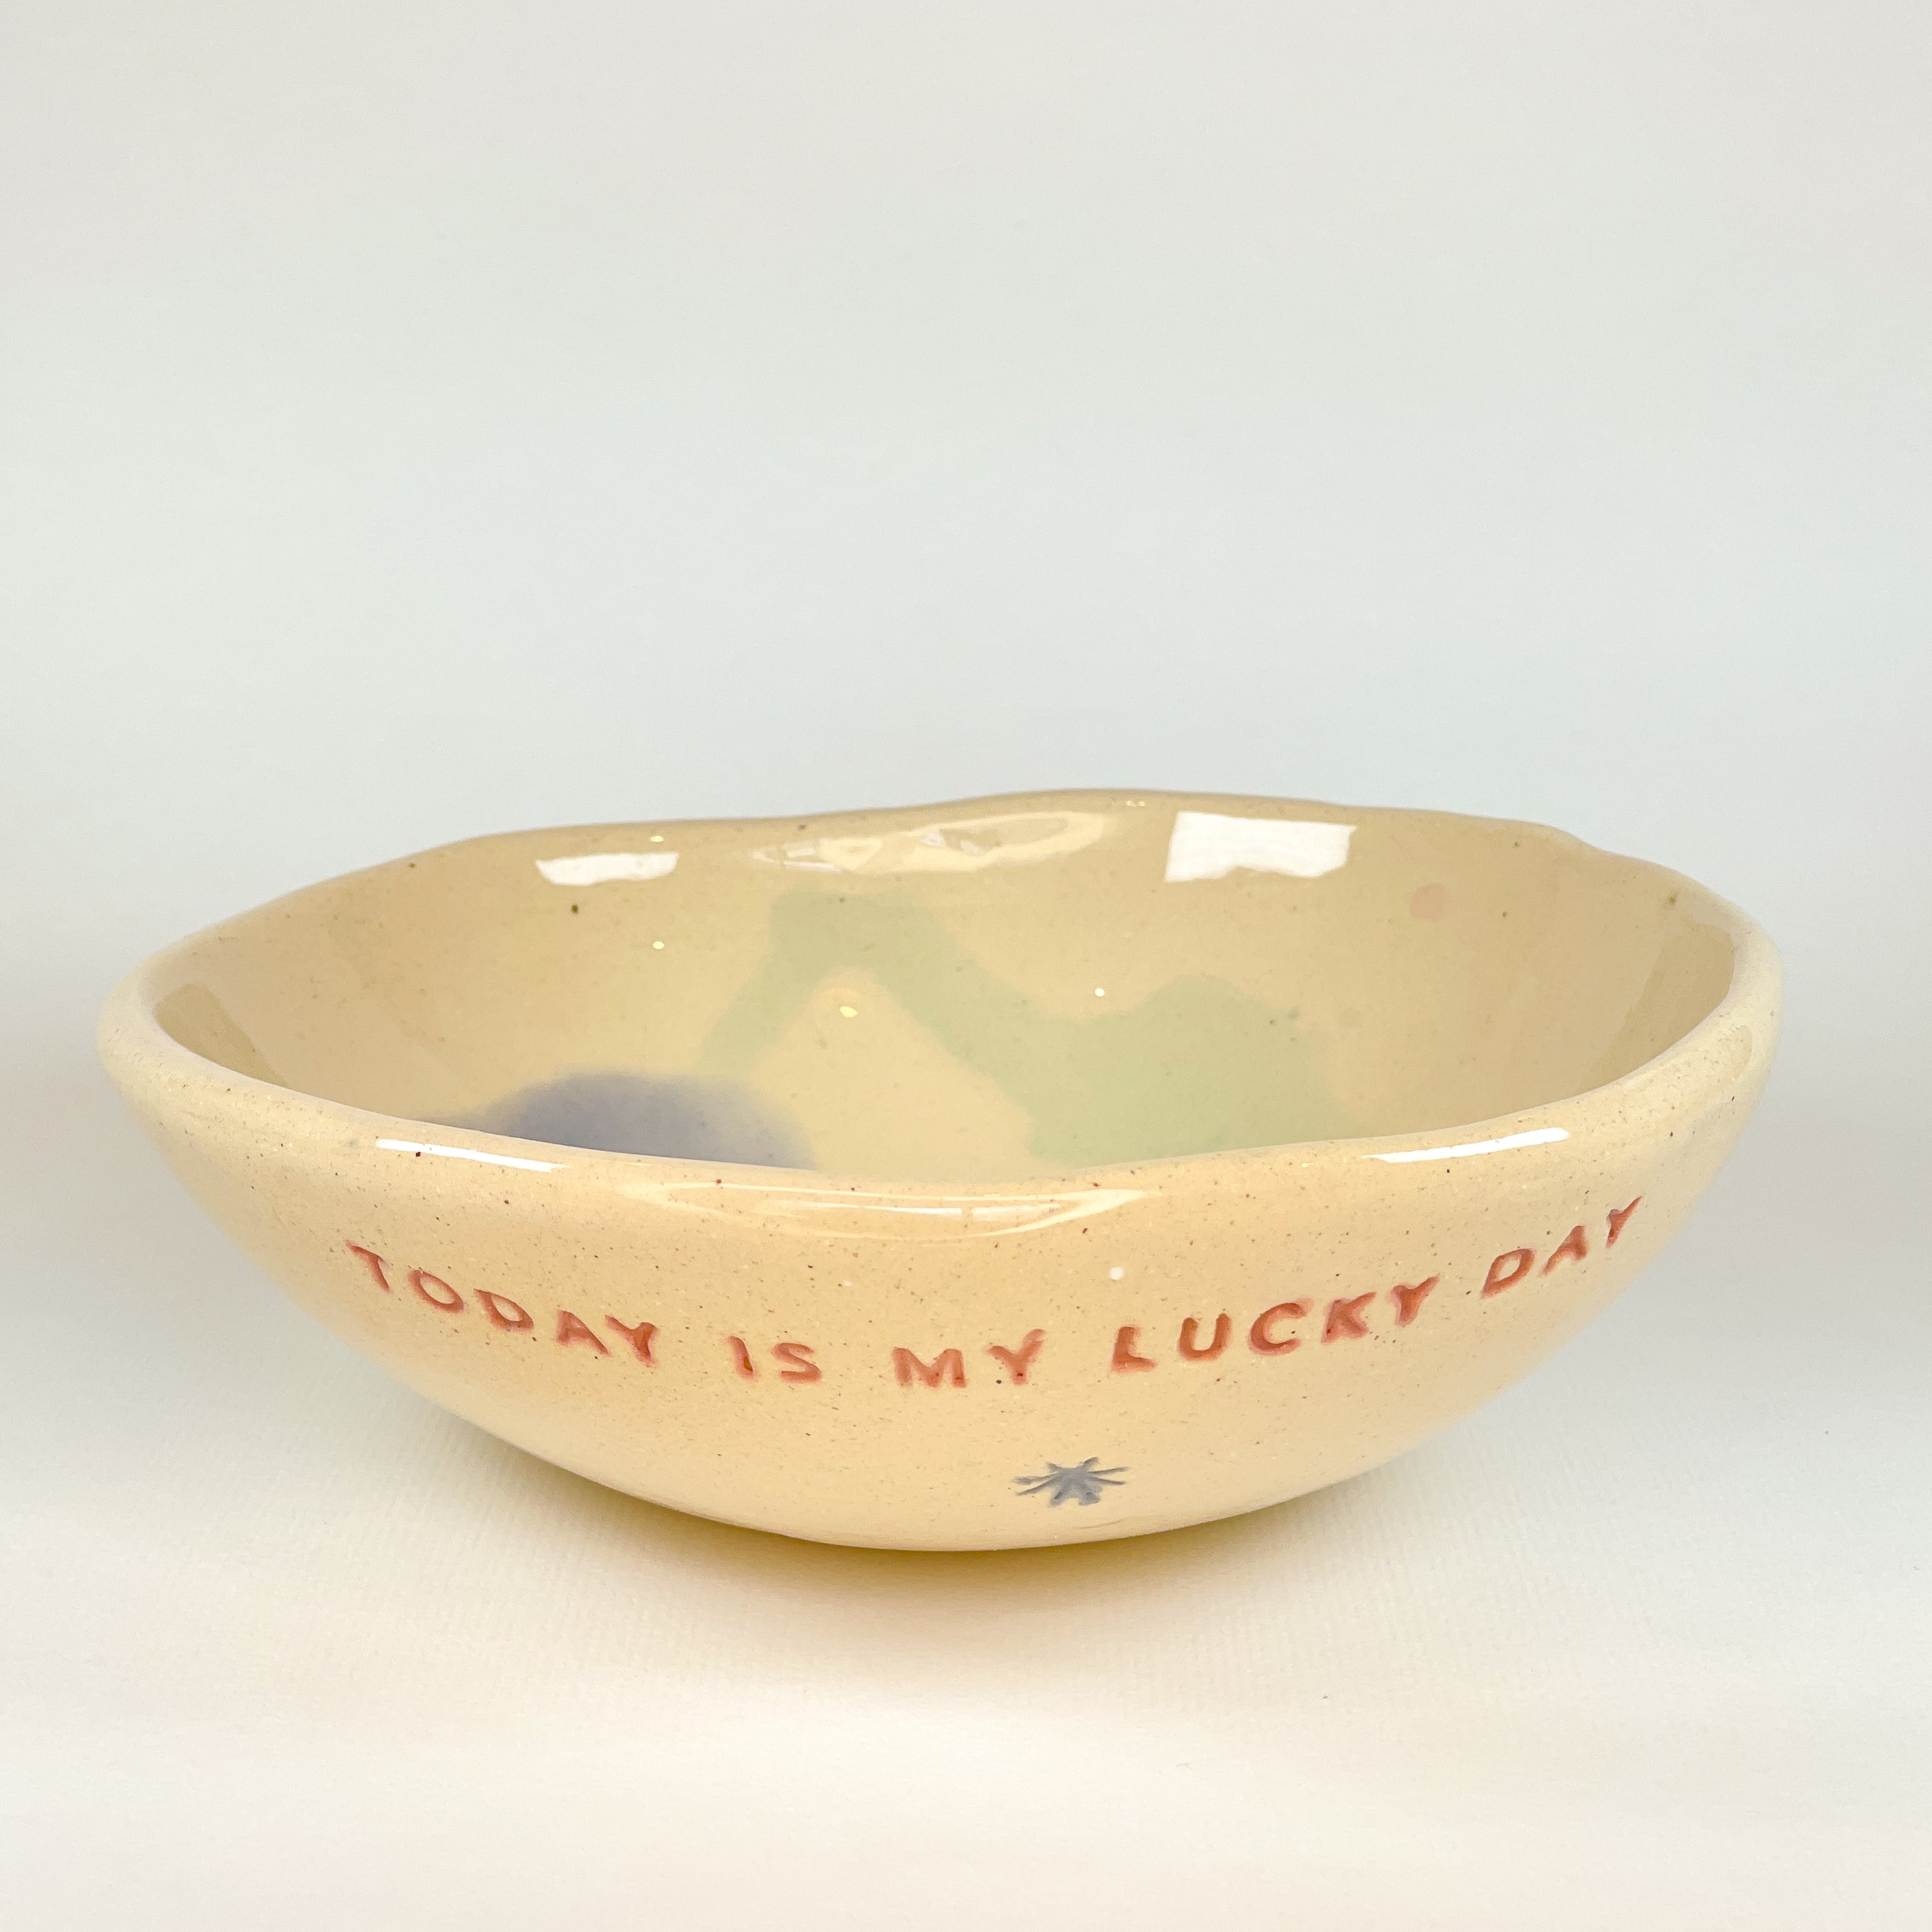 Bowl Mediano - Today Is My Lucky Day